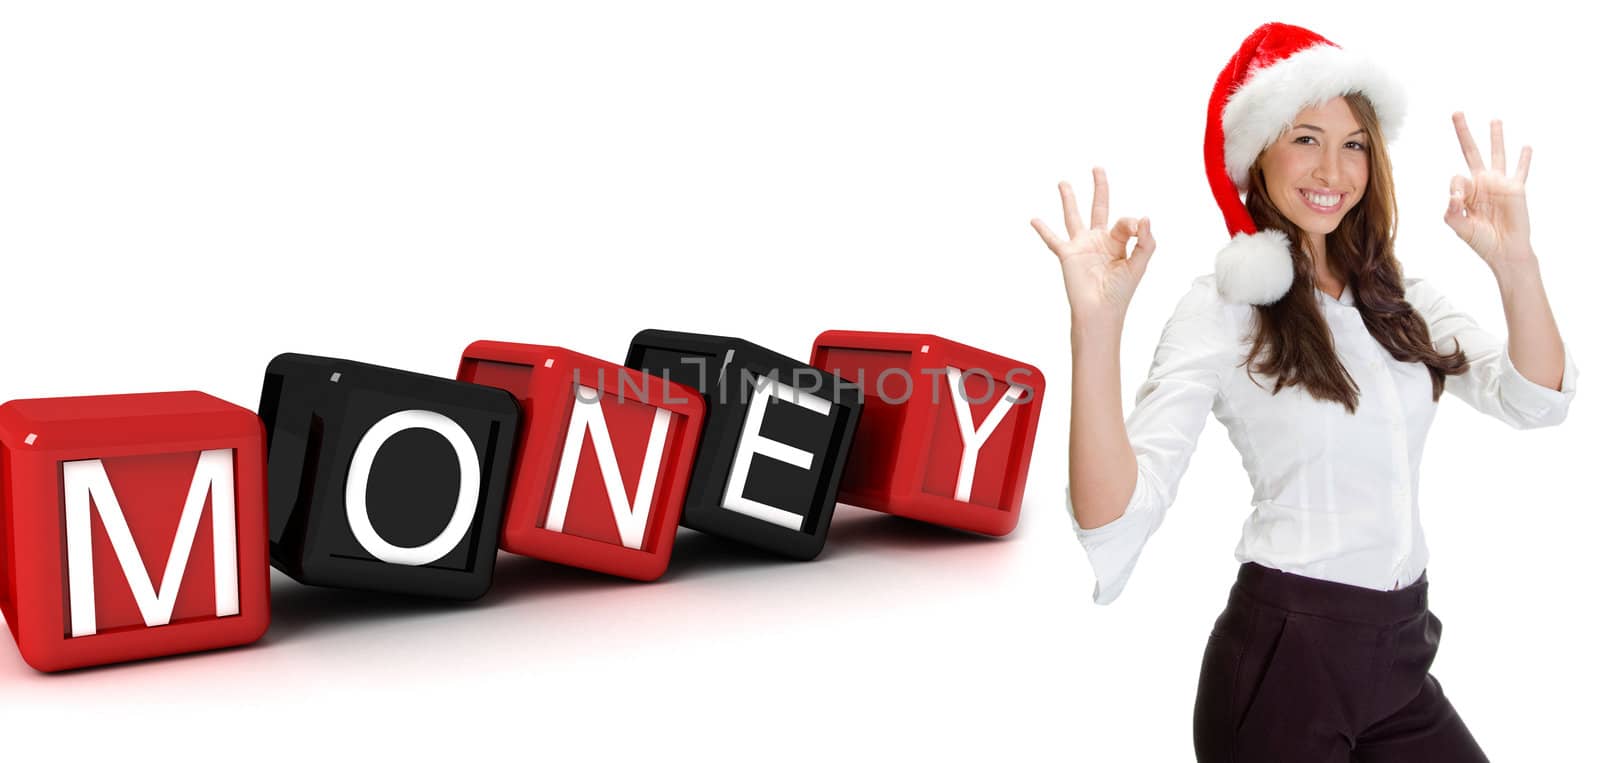 three dimensional building blocks with money text and women gesture okay on an isolated white background 